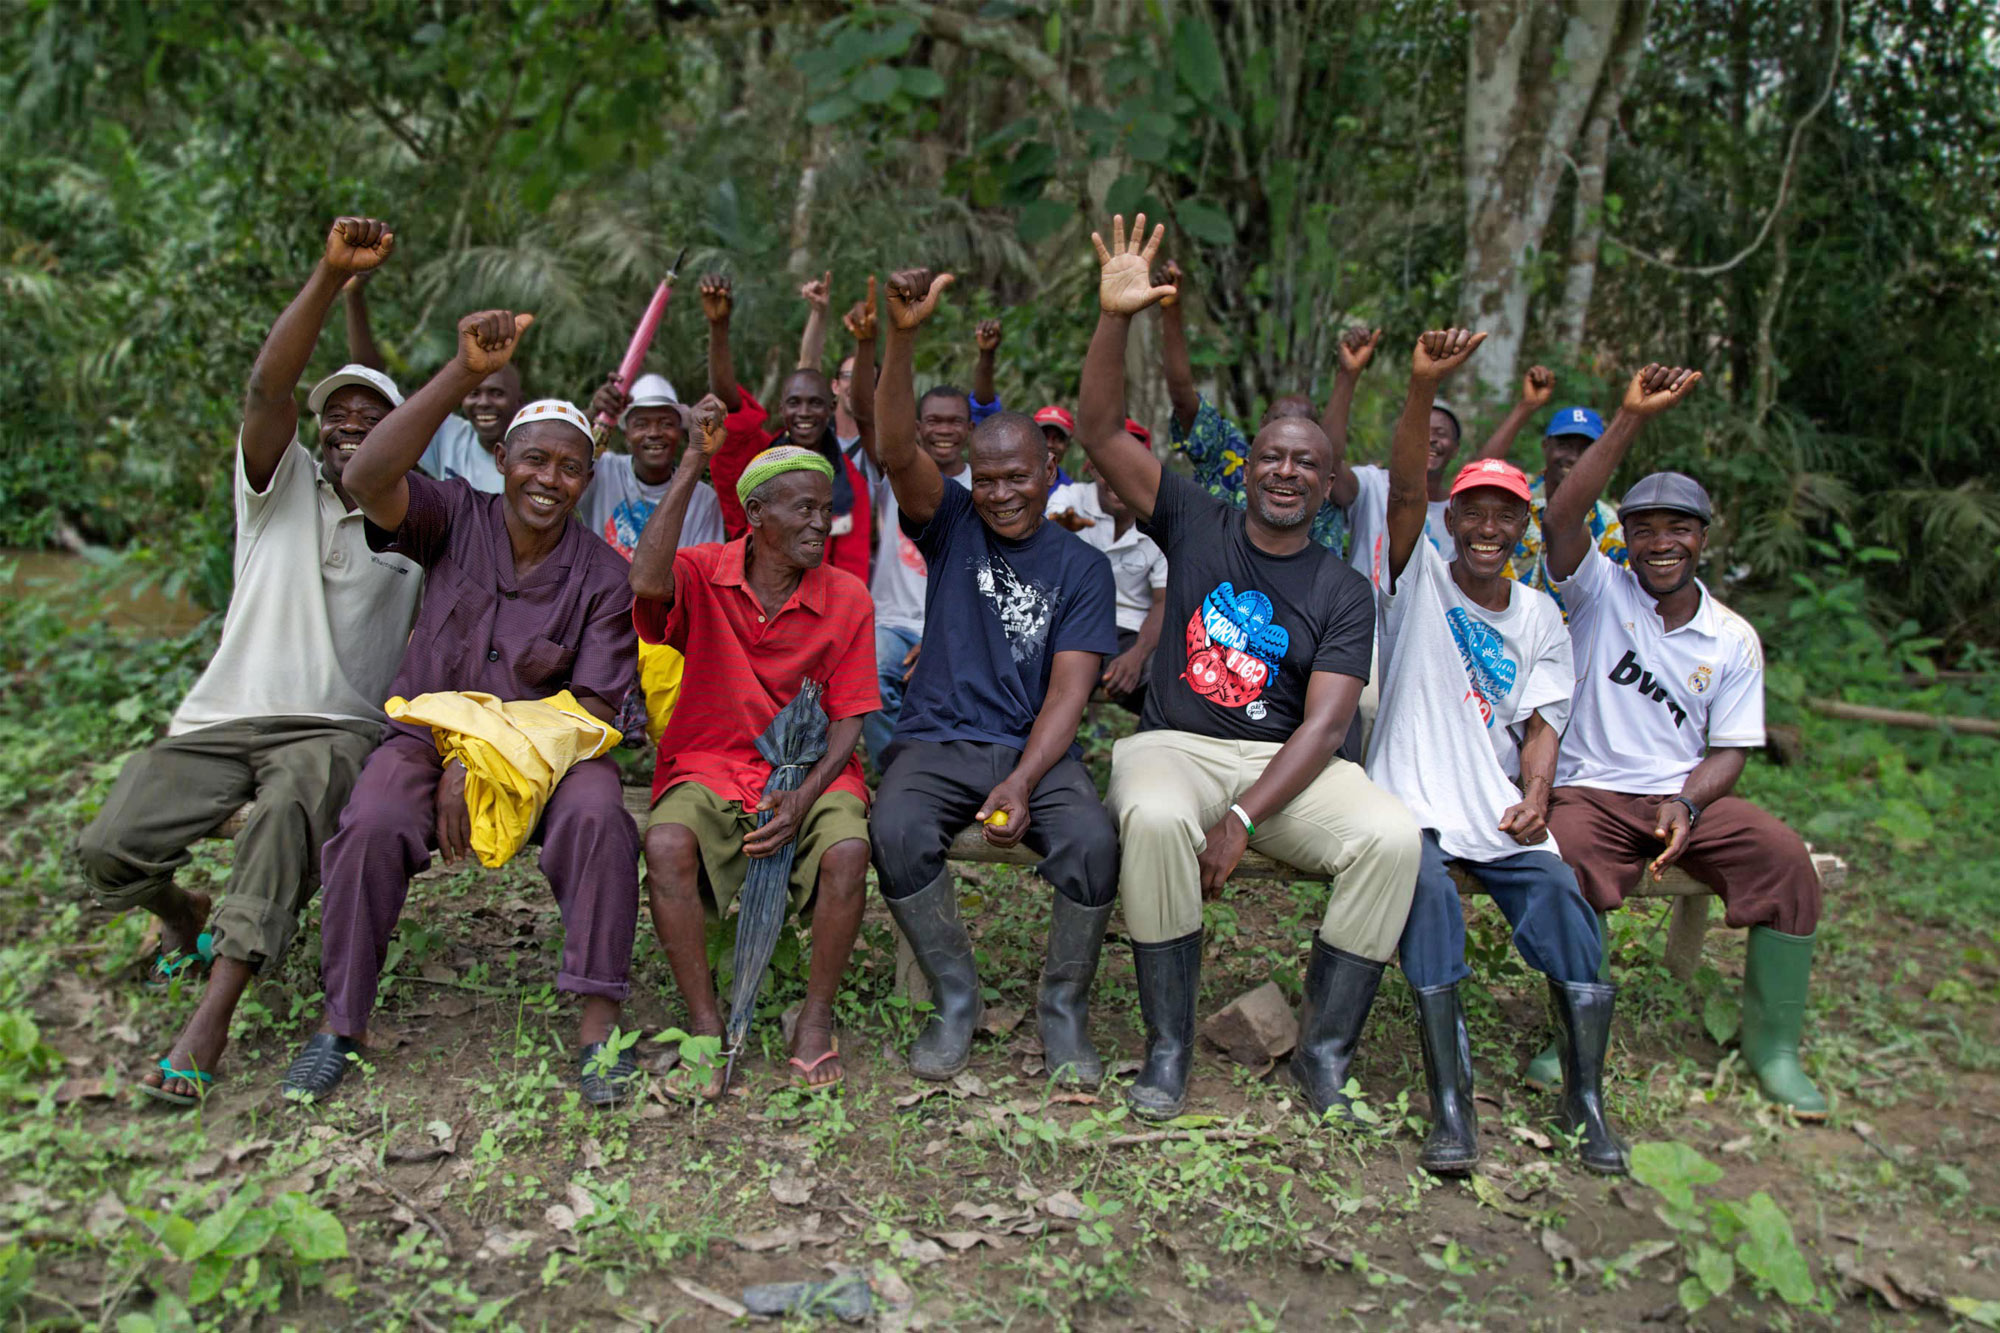 Albert, from the Karma Foundation, sitting with local farmers in Sierra Leone. The group are all smiling and waving to the camera